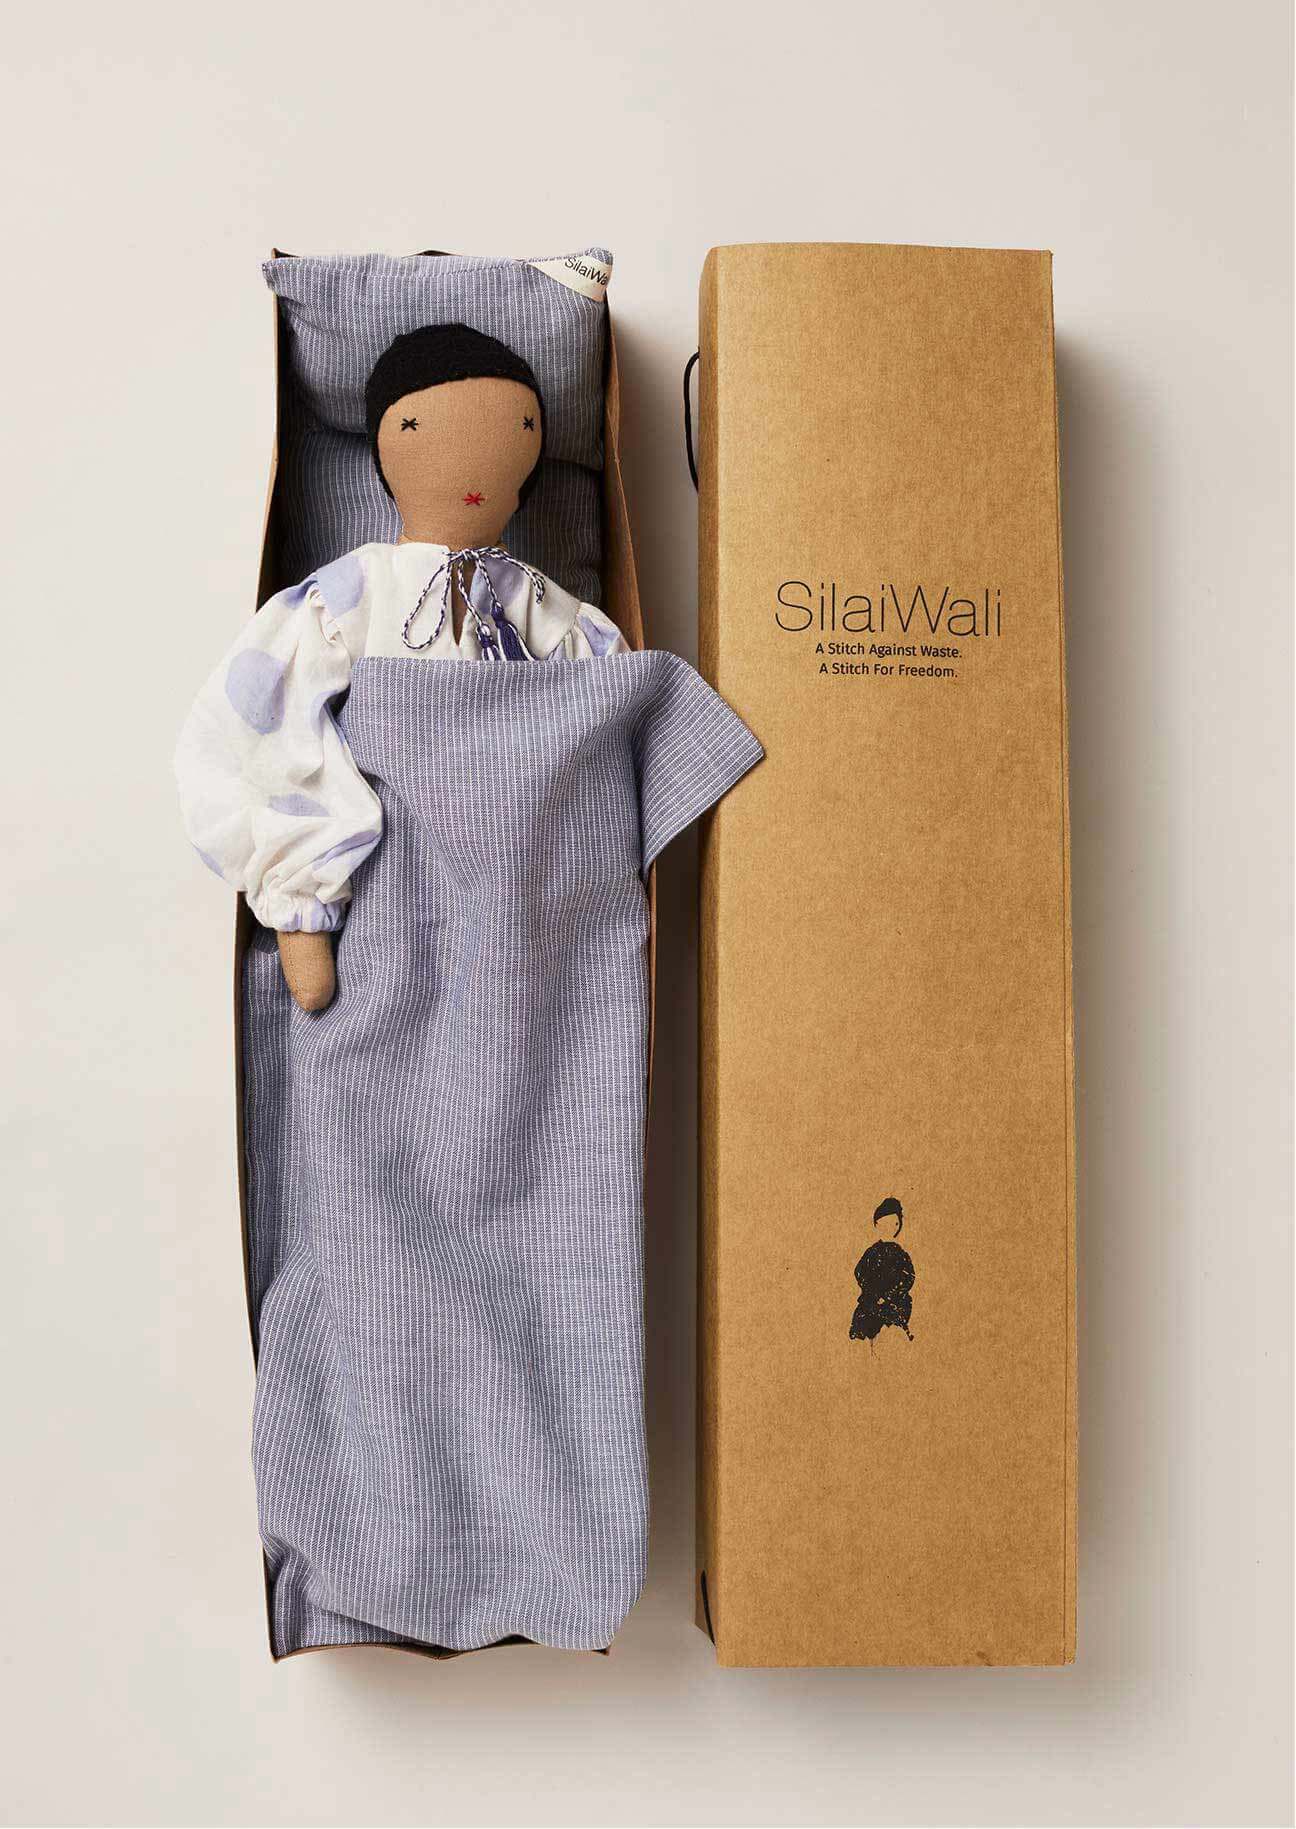 Upcycled rag doll with blue and white printed dress, made by artisans at FairTrade studio Silaiwali